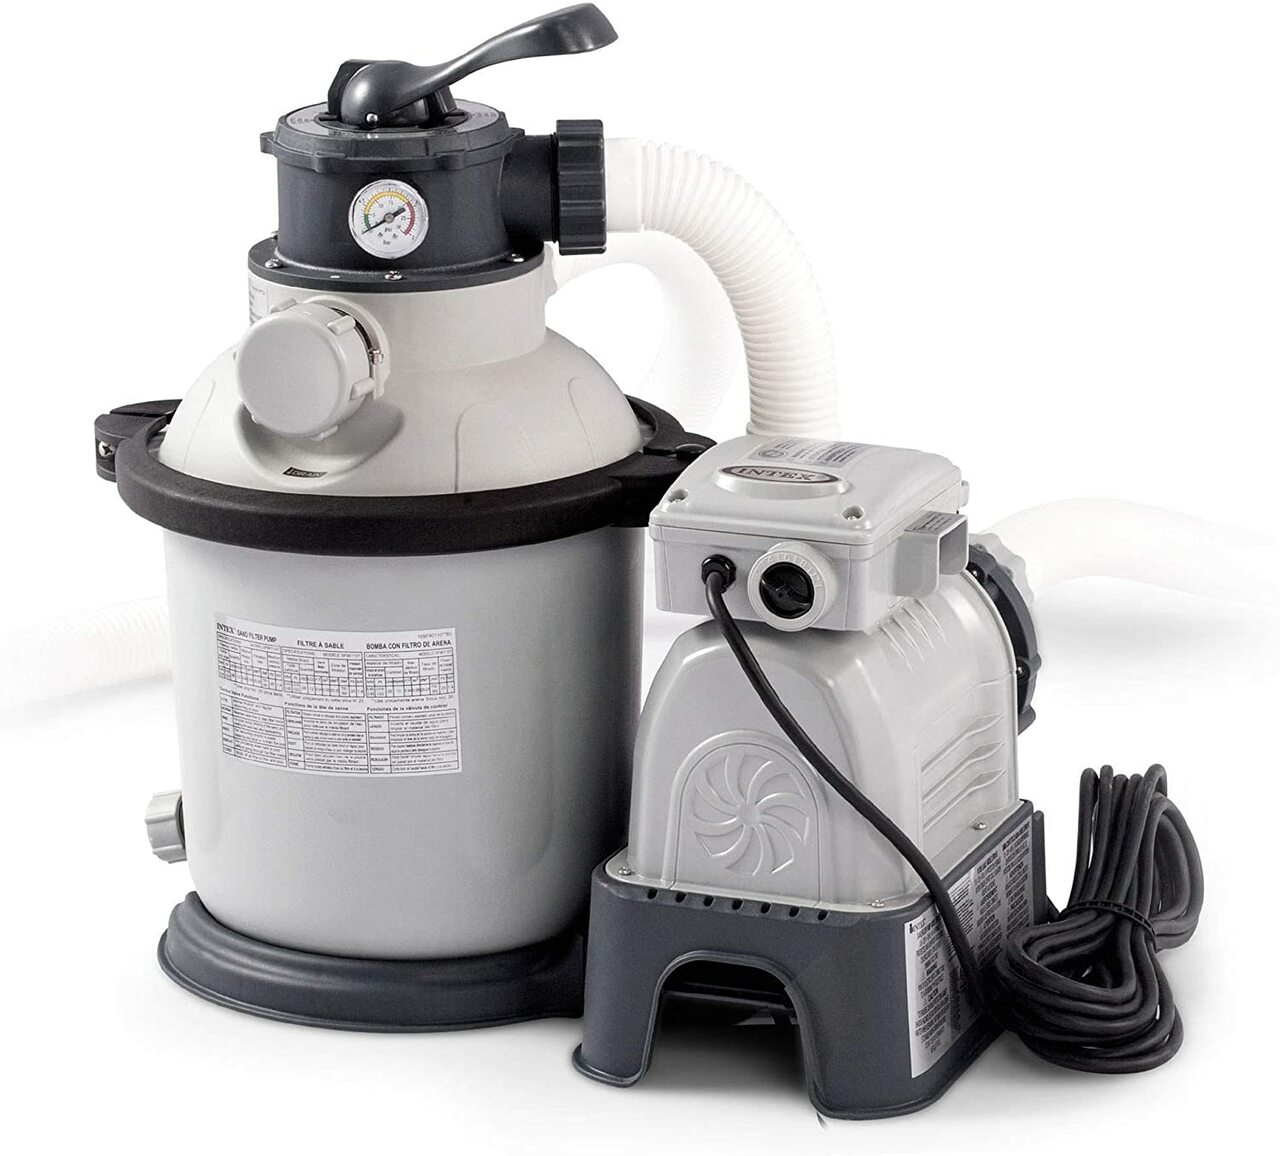 ncludes the 110-120V Krystal Clear sand filter pump with a pump flow rate of 1,200 gallons per hour